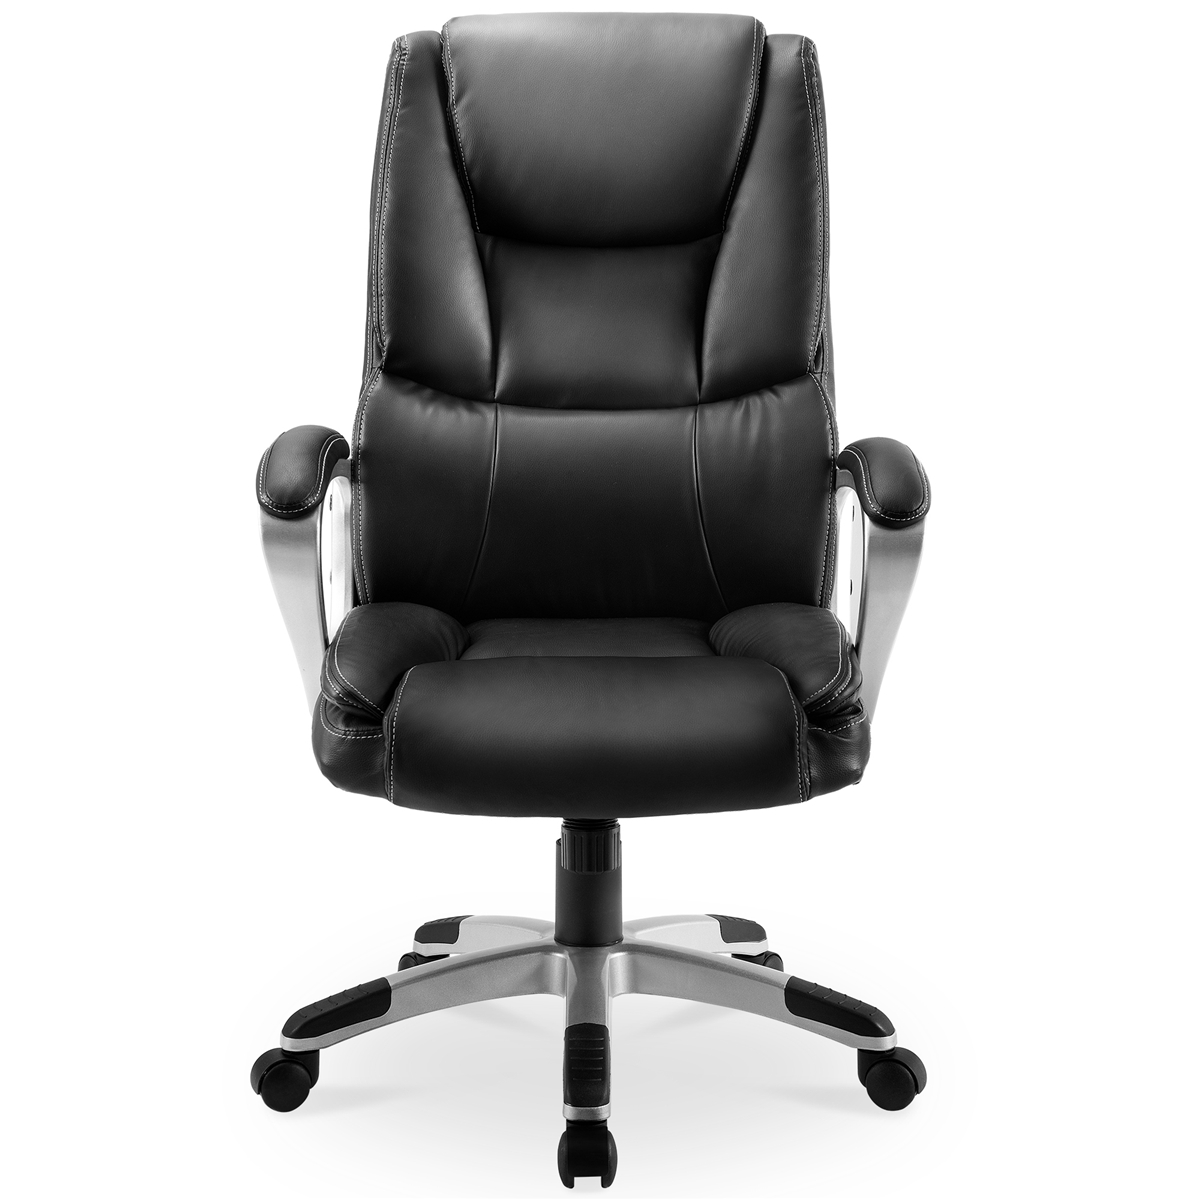 

US exclusive Merax Ergonomic Office Chair High-Back PU Leather Executive Chair Rotating Lift Chair Modern Computer Chair Folding Chair with Lumbar Support